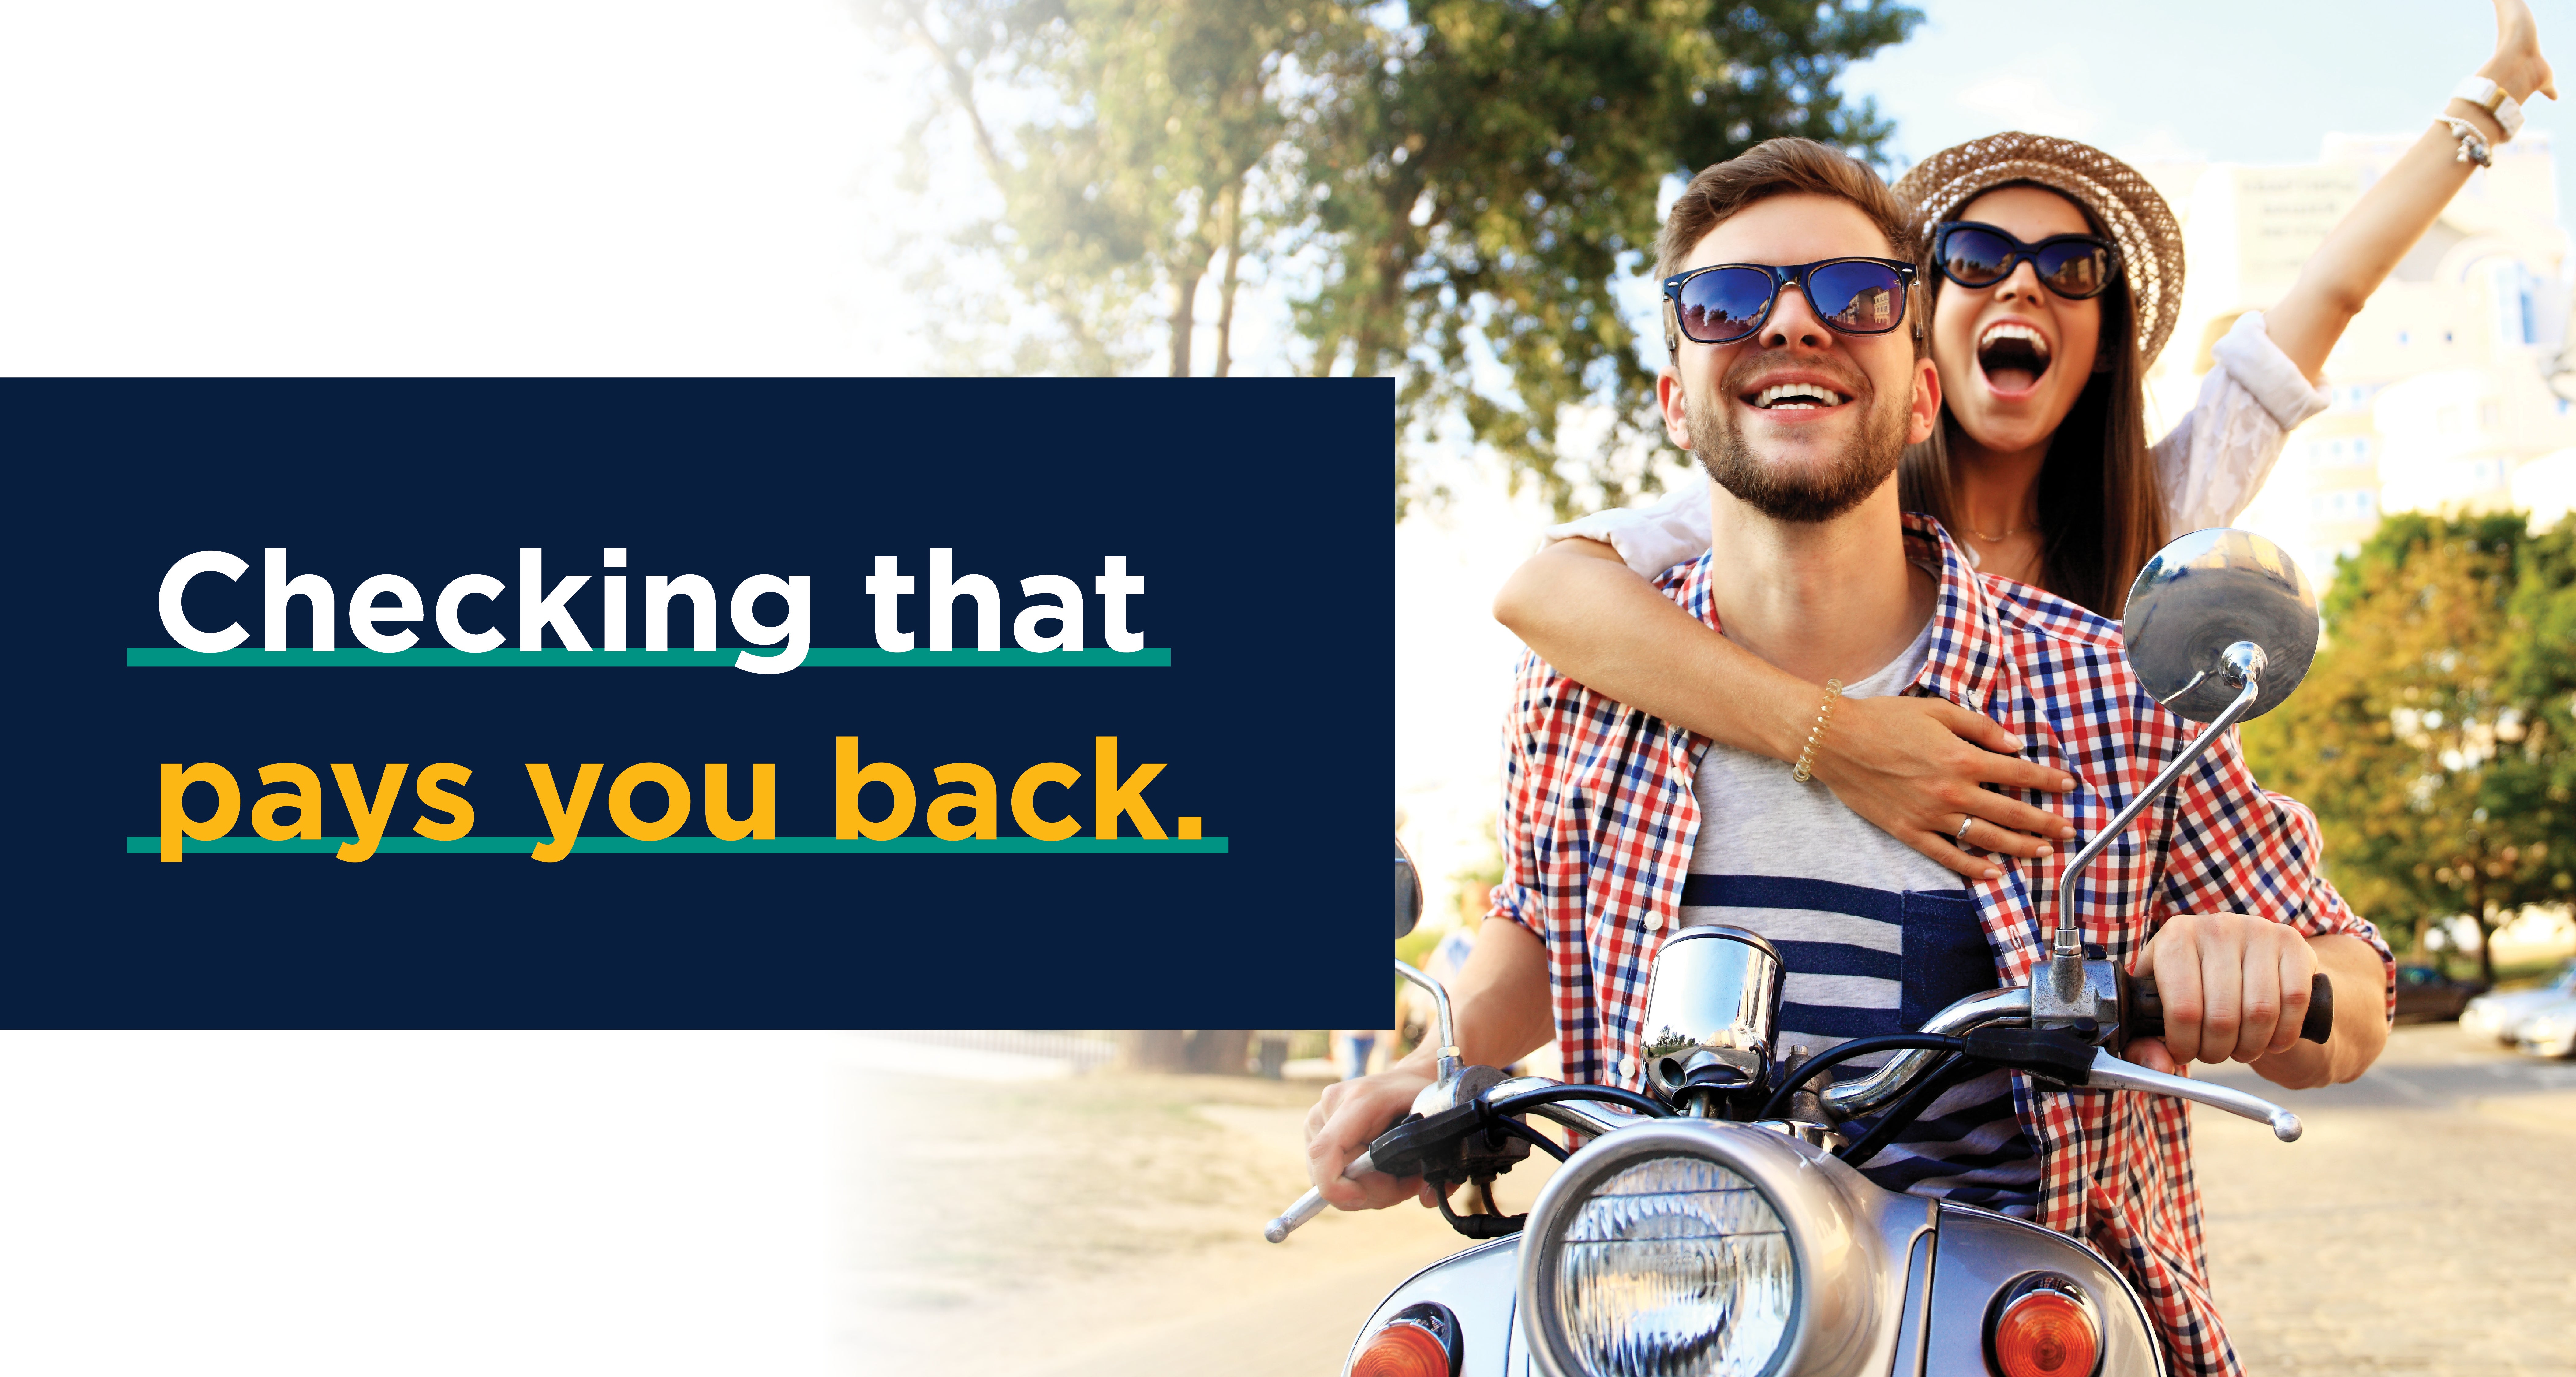 Man and woman riding a motorcycle, excited to learn about a high-yield checking account.